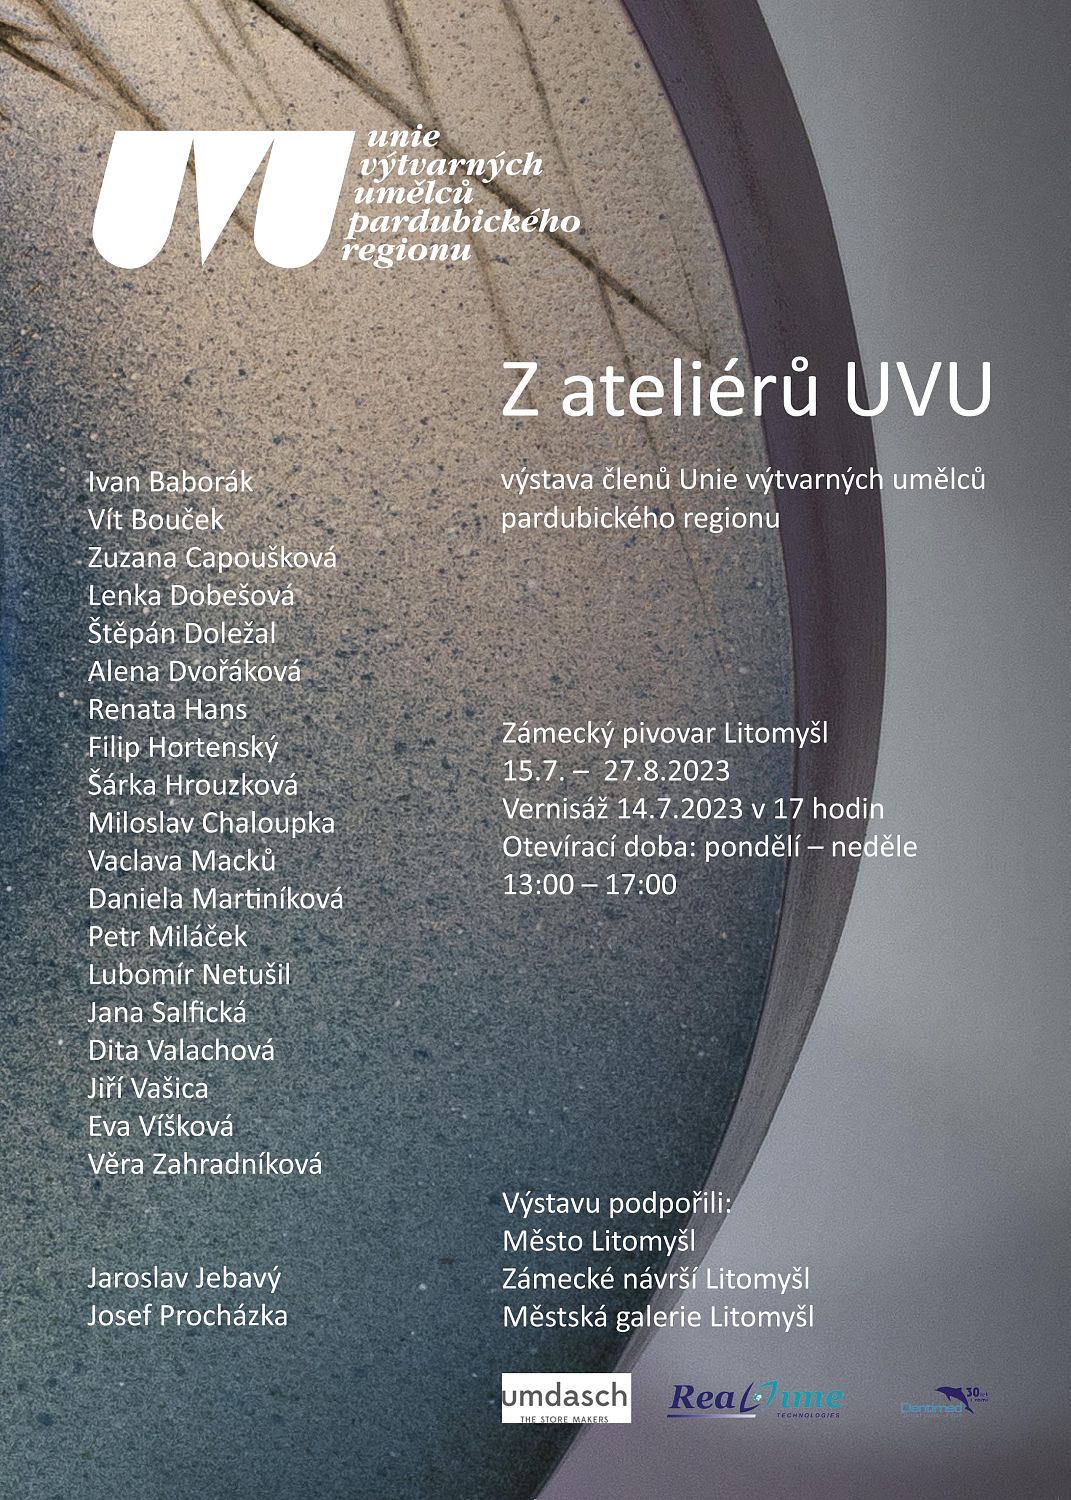 Summer exhibition of the Union of Artists of the Pardubice Region at the Chateau Hill